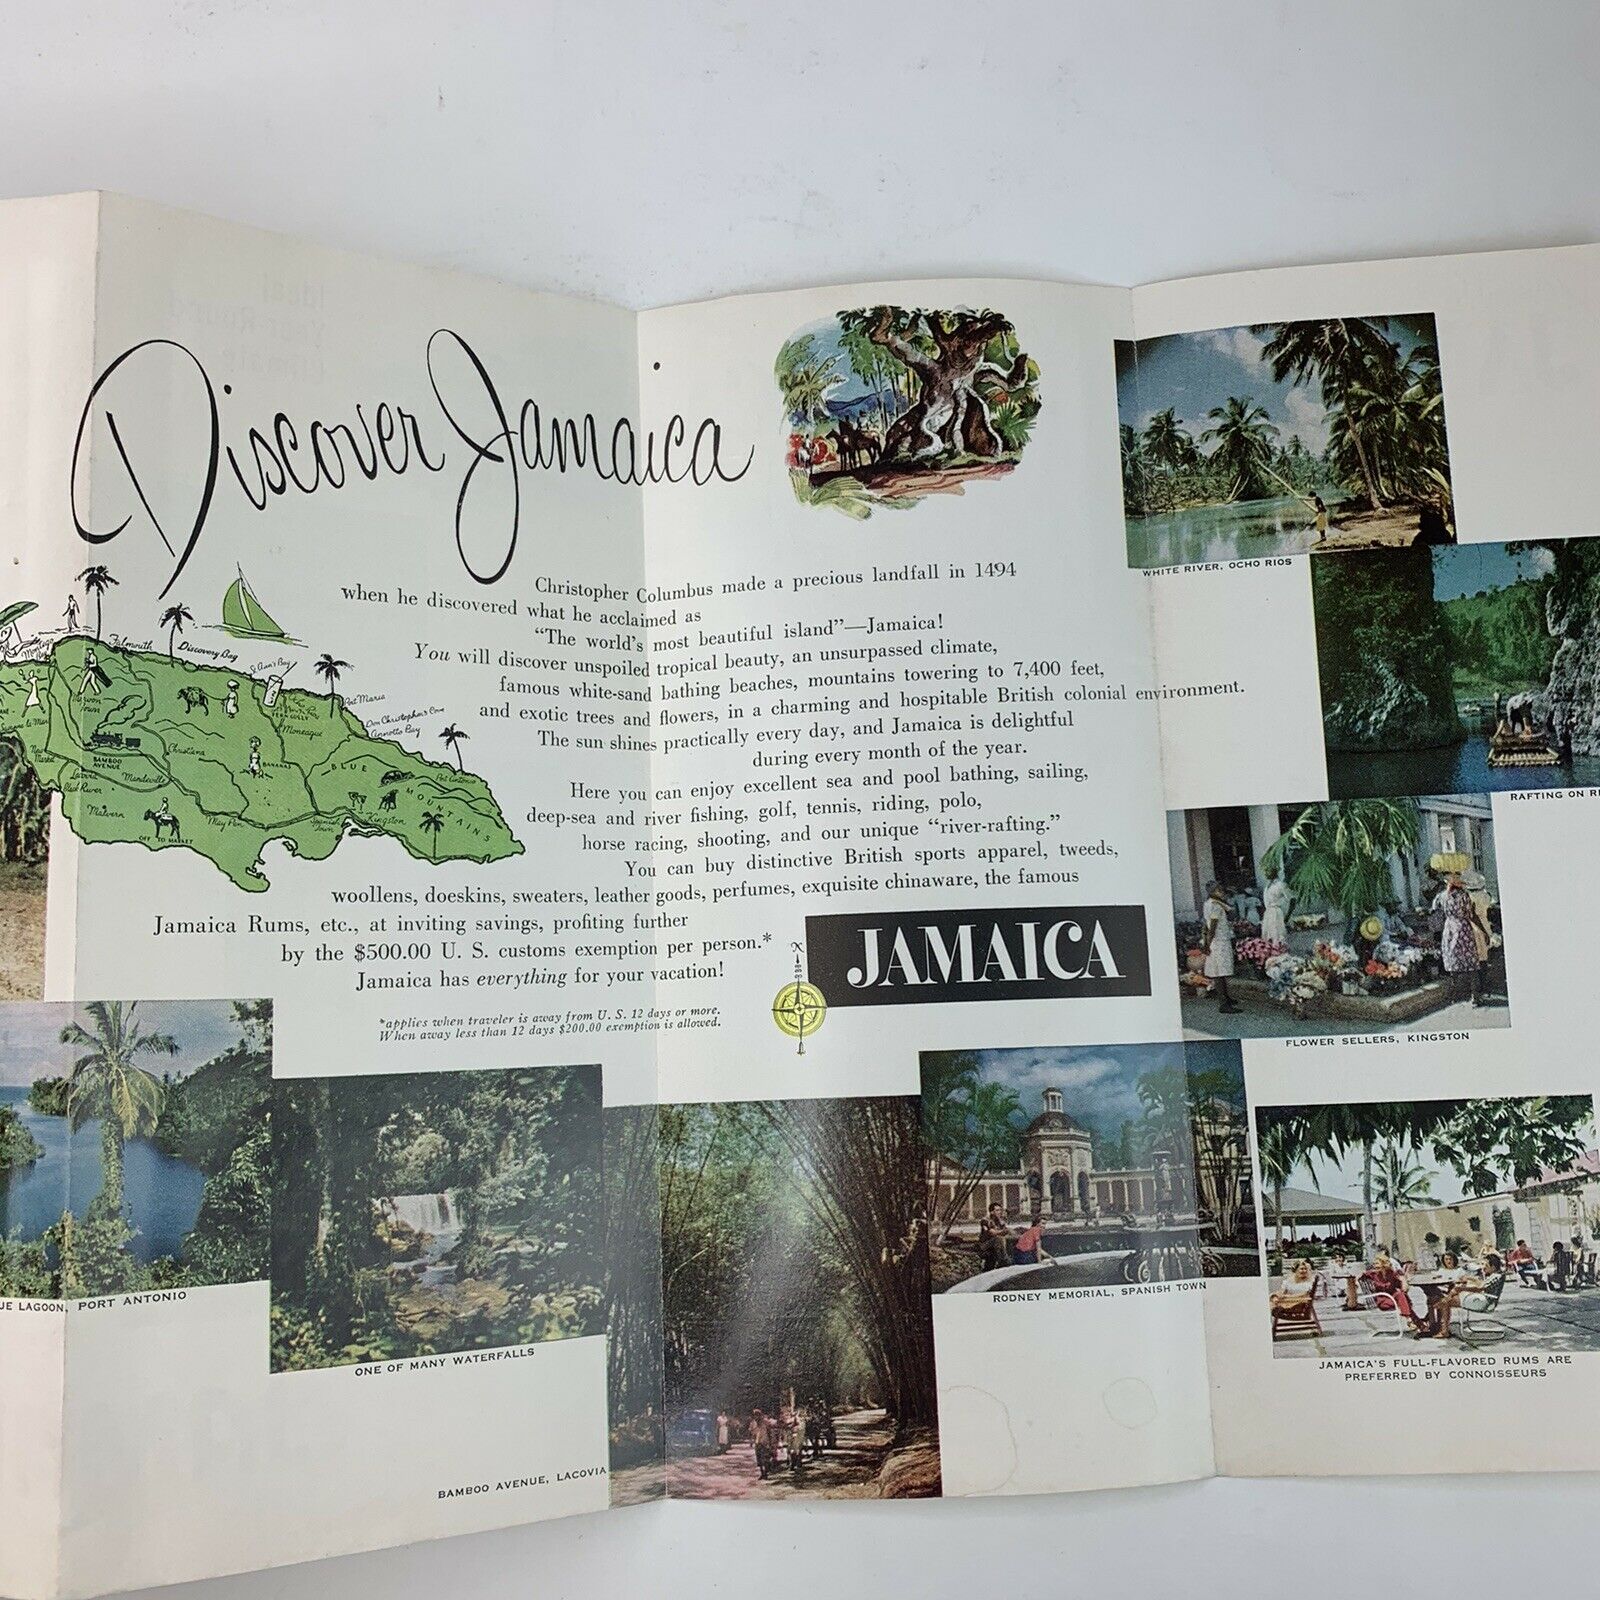 Discover Jamaica International Color Brochure – The Stand Alone